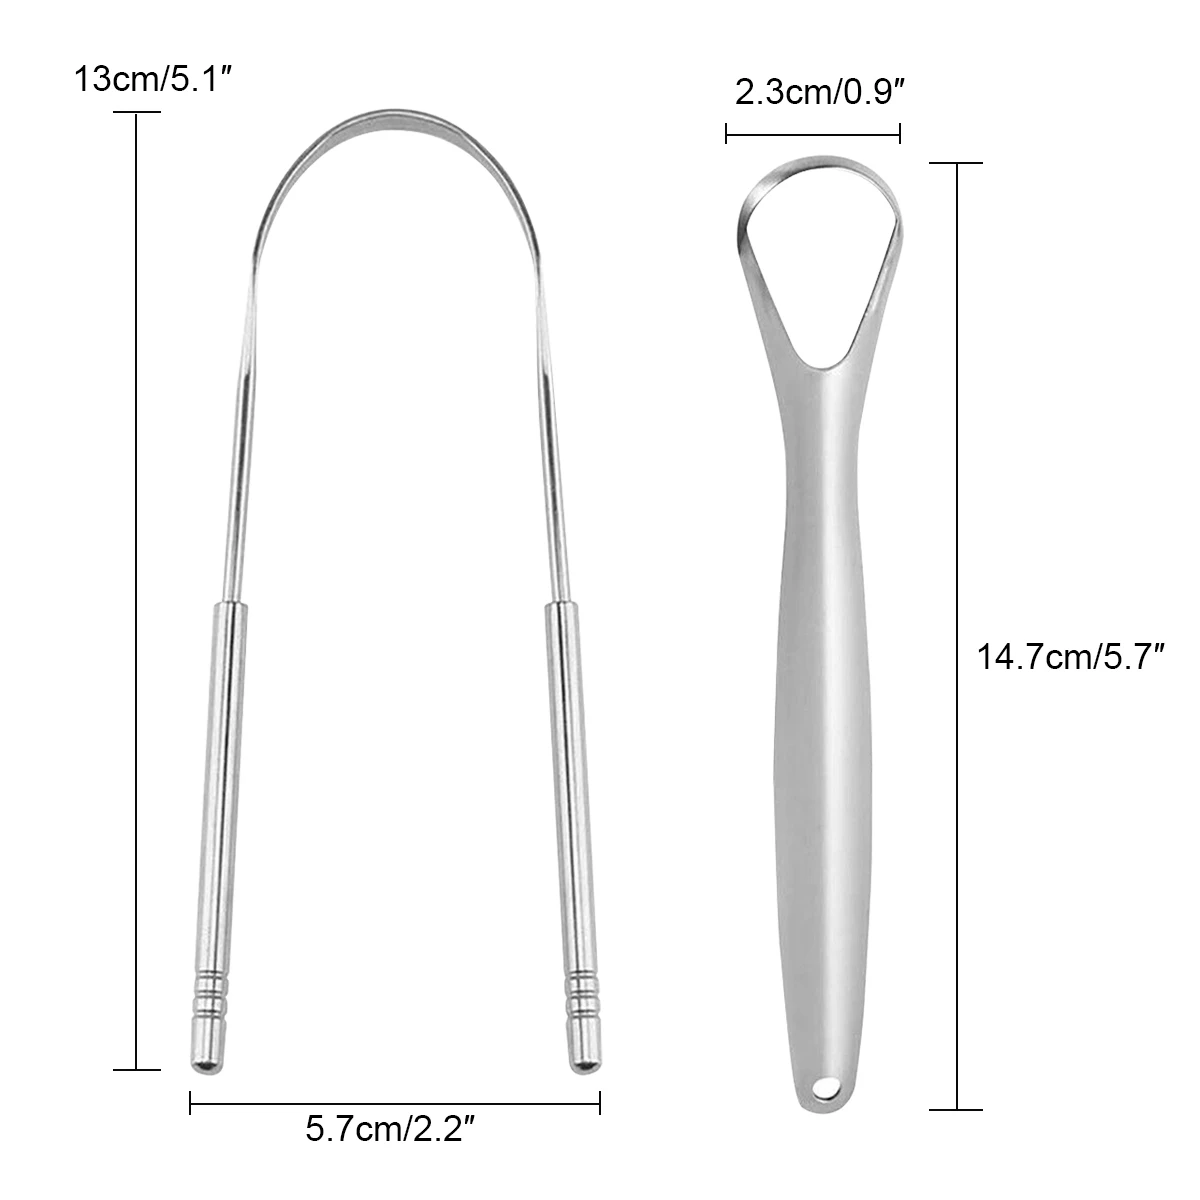 Stainless Steel Dental Tool Set Tongue Scraper Oral Care dental ultrasound scaler electric tooth cleaning tool oral care plaque spatula removes tartar dental scraper dental instrument